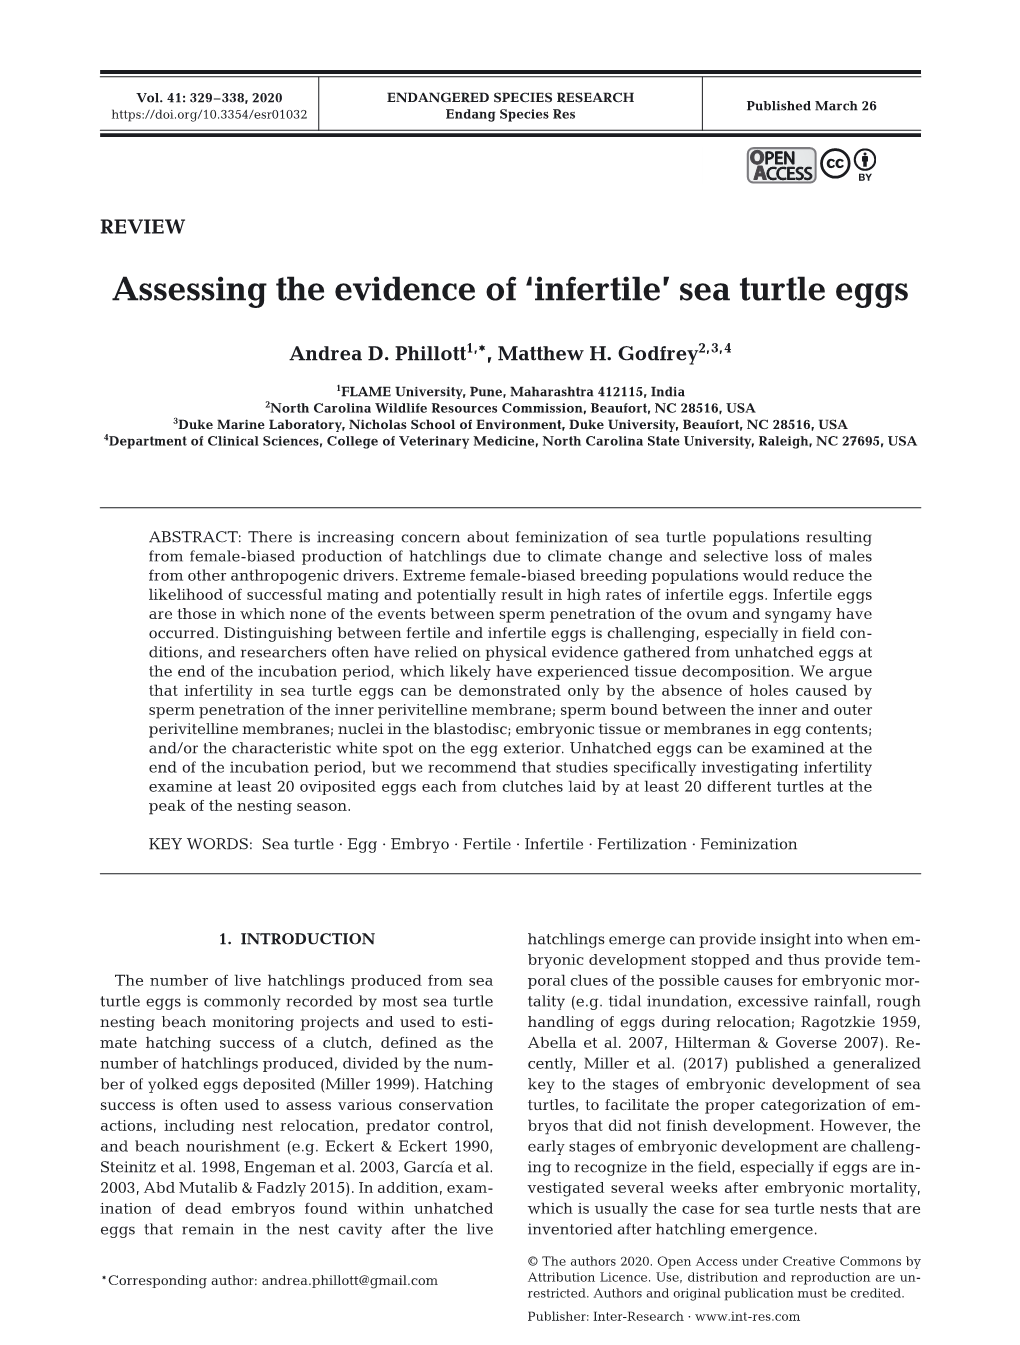 Assessing the Evidence of 'Infertile'sea Turtle Eggs